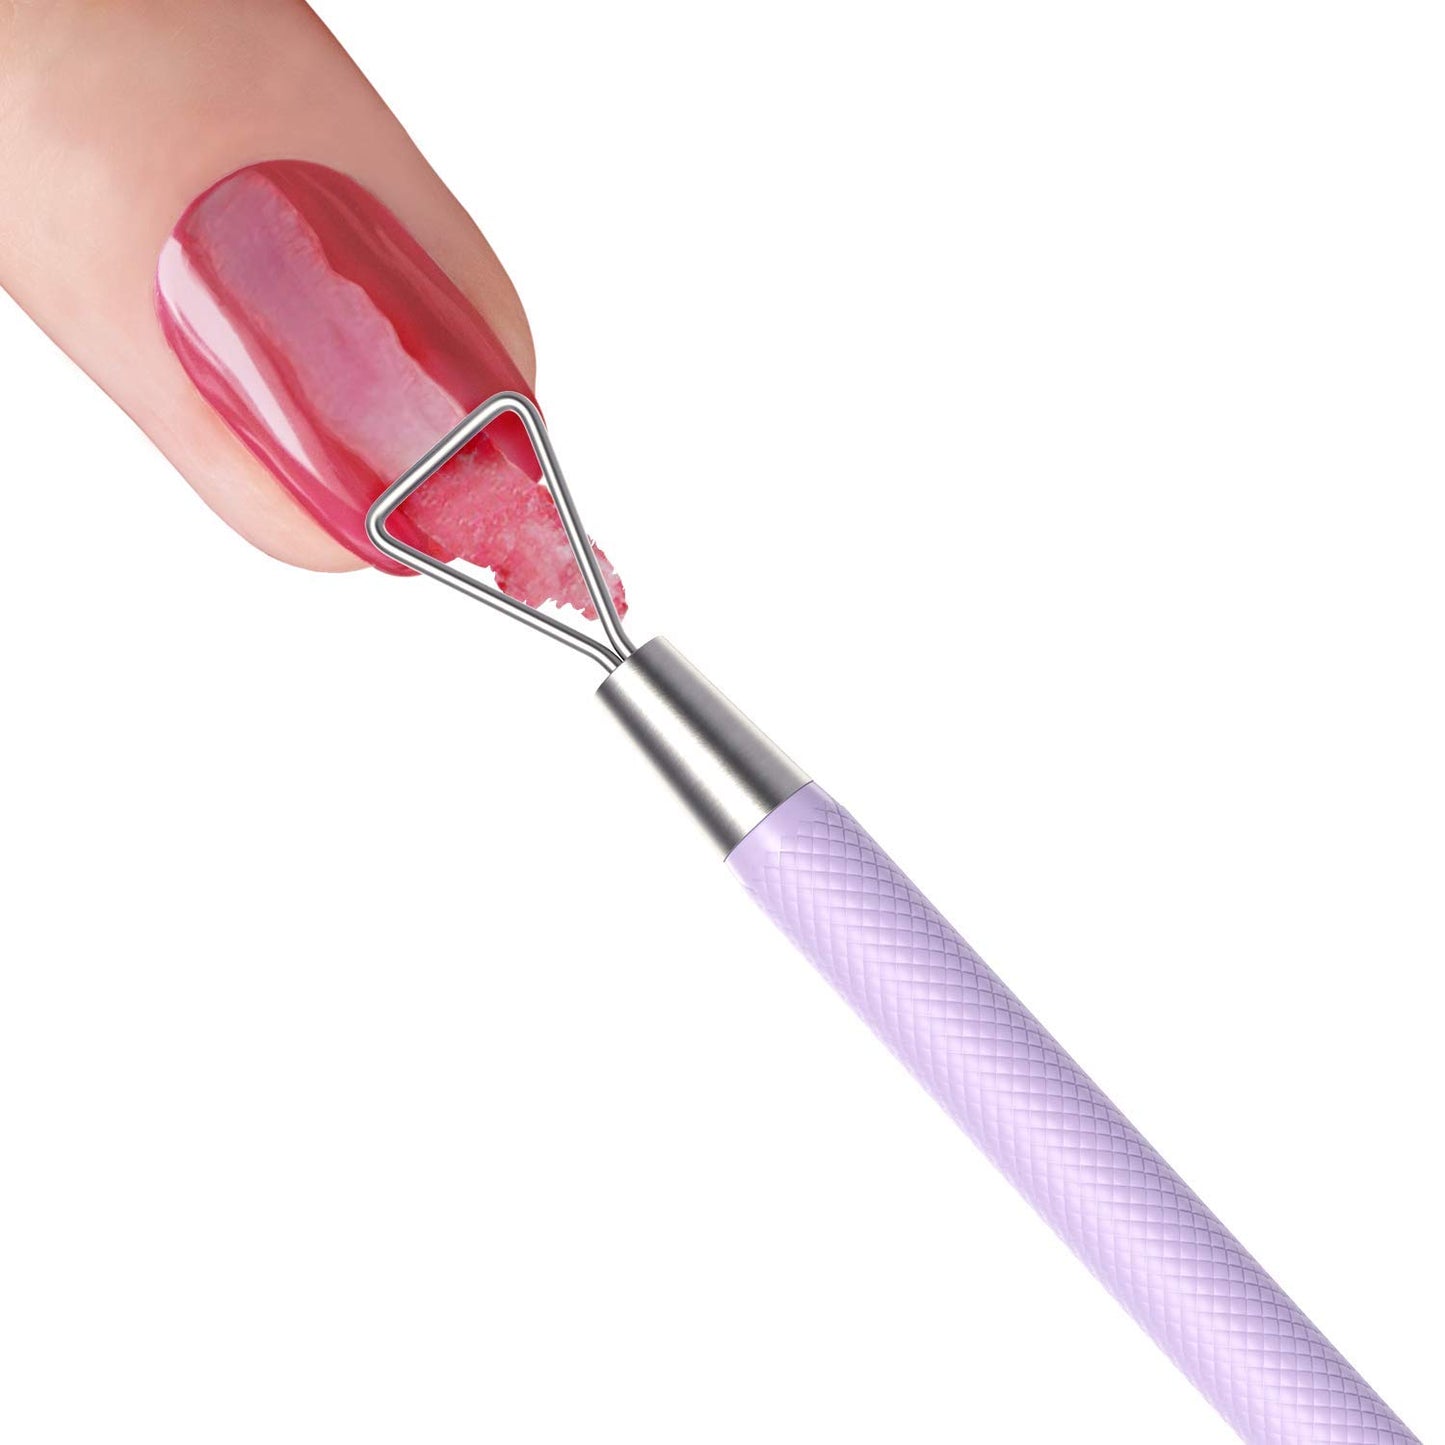 cuticle remover scratch off tool for lottery tickets Fingernail